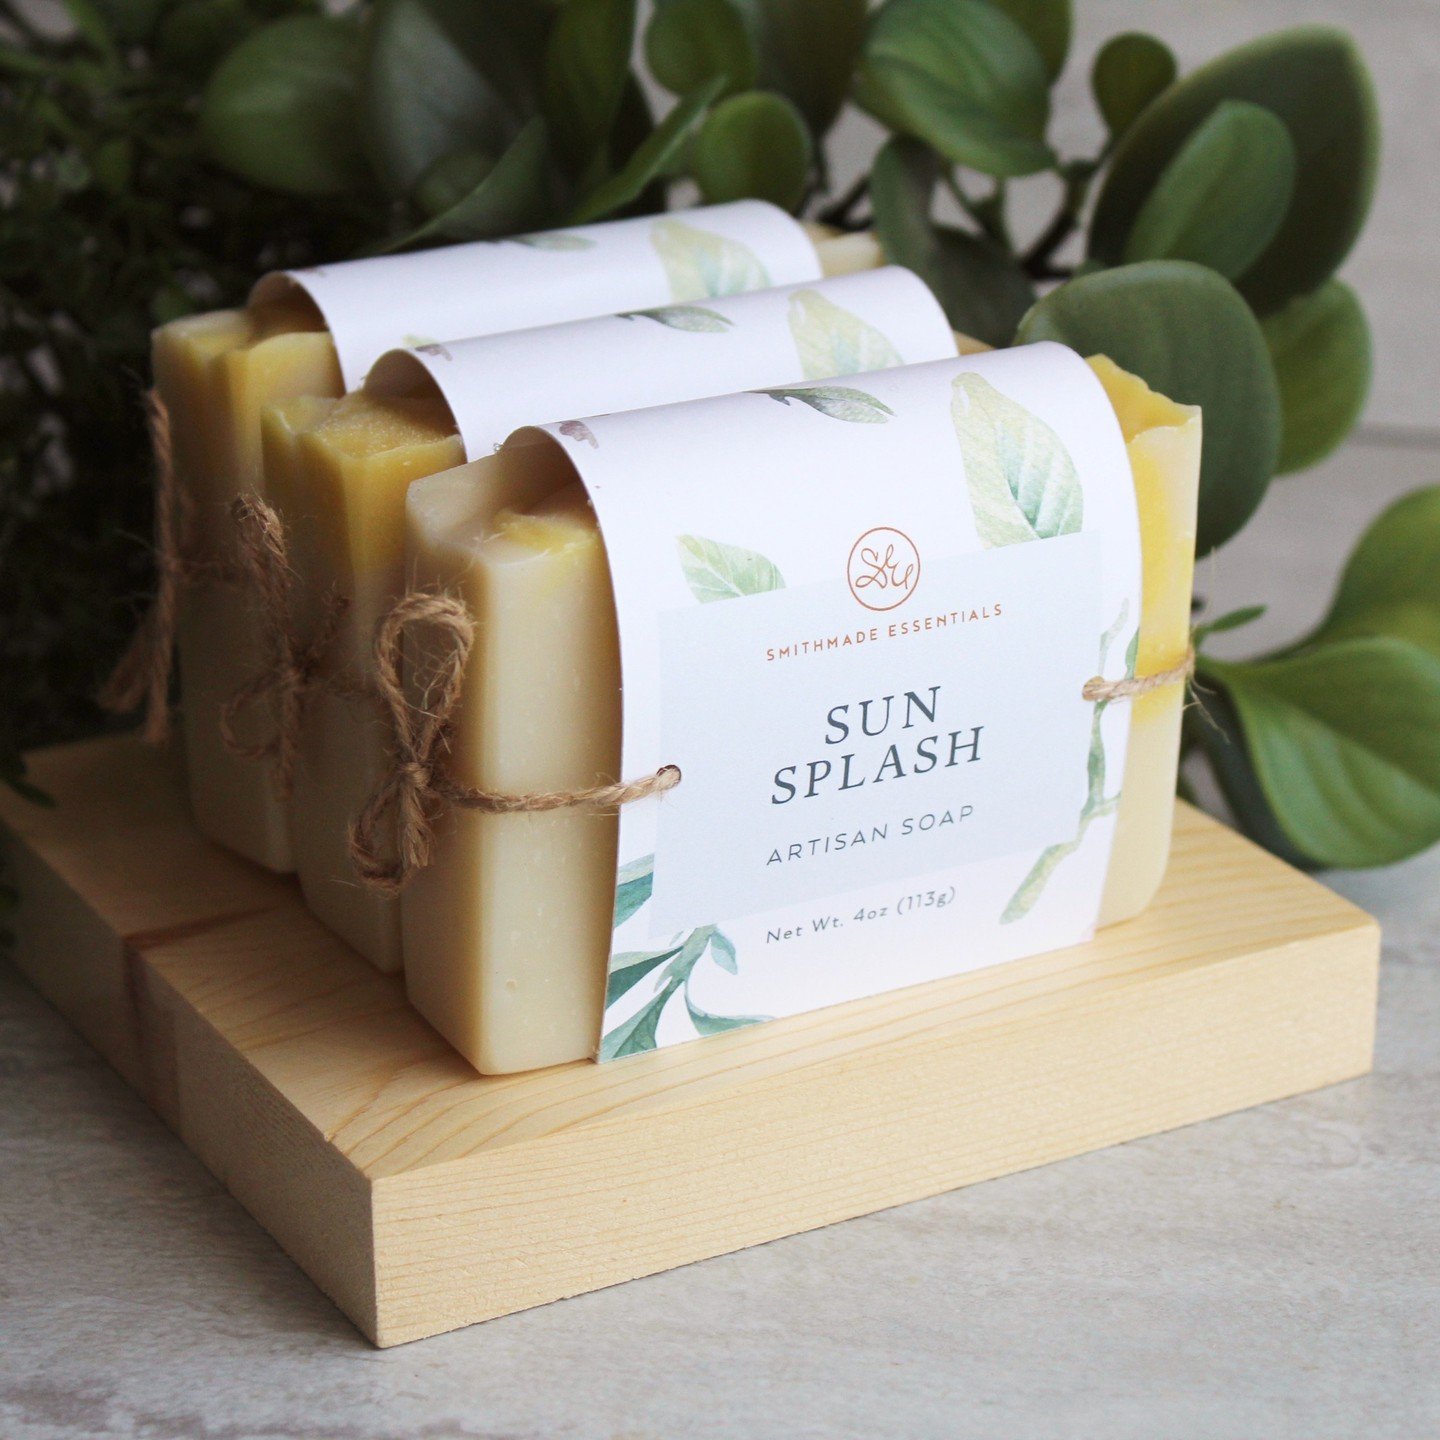 The soap I make is highly designed, and it's not just the bars themselves. It's also the packaging. Since starting my business in 2018, I've printed and cut all my own packaging. This is partly because I'm a designer and have the skill to do so, but 